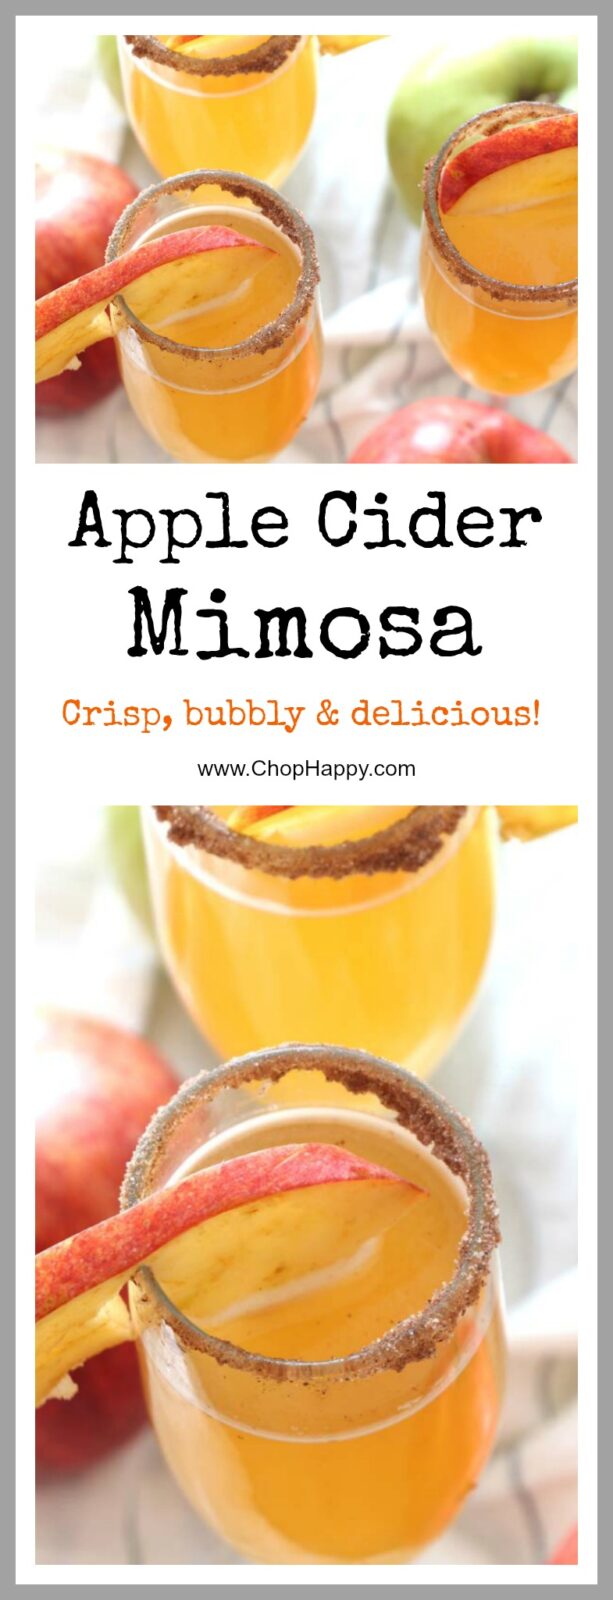 Apple Cider Mimosa Recipe - is a super easy cocktail recipe anyone can make in a snap. It is fun crisp, and bubbly. www.ChopHappy.com 